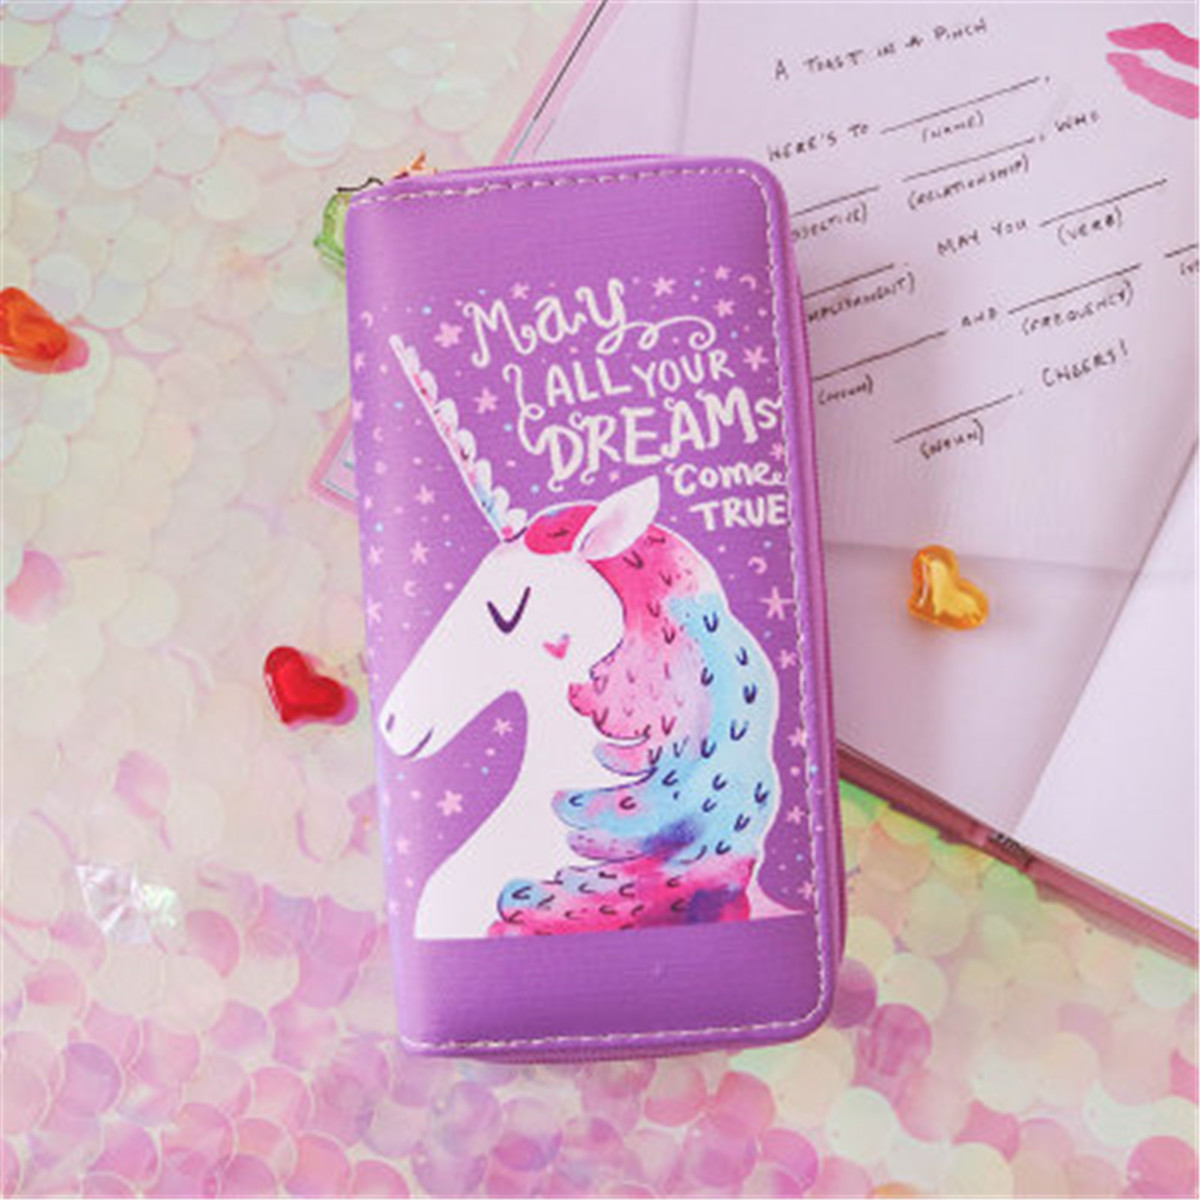 Universal-Colorful-Zipper-Bag-Unicorn-Phone-Wallet-Purse-for-Phone-Under-55-inches-1226486-9